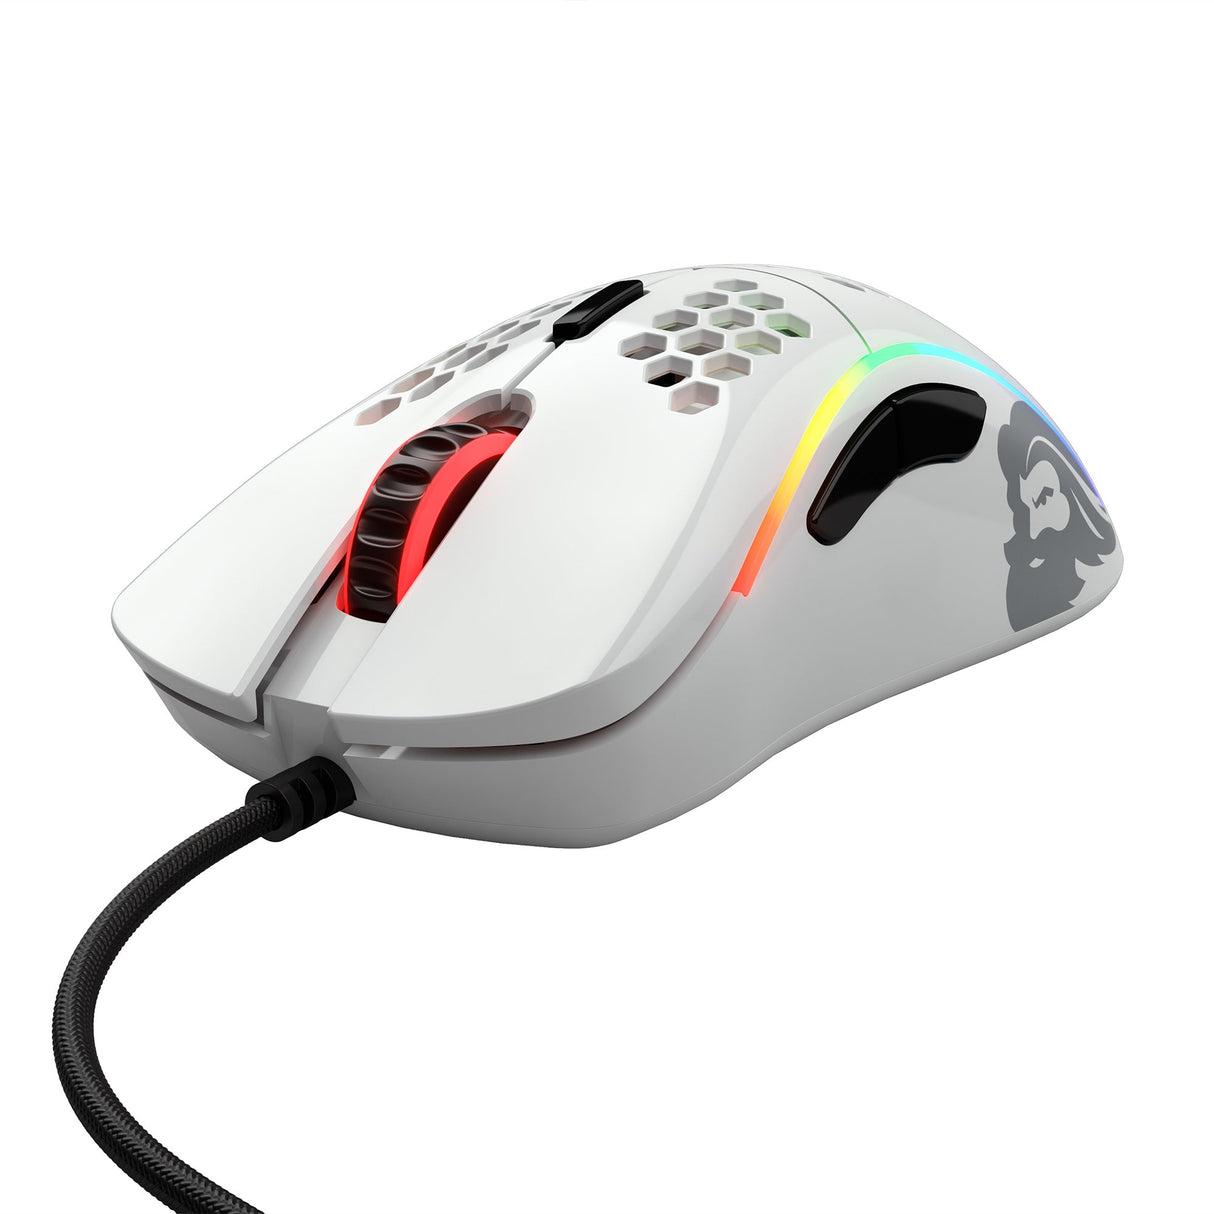 Glorious Gaming Mouse Model D- (61g - Matte White) - Level UpGloriousPC Gaming Accessories0850005352440